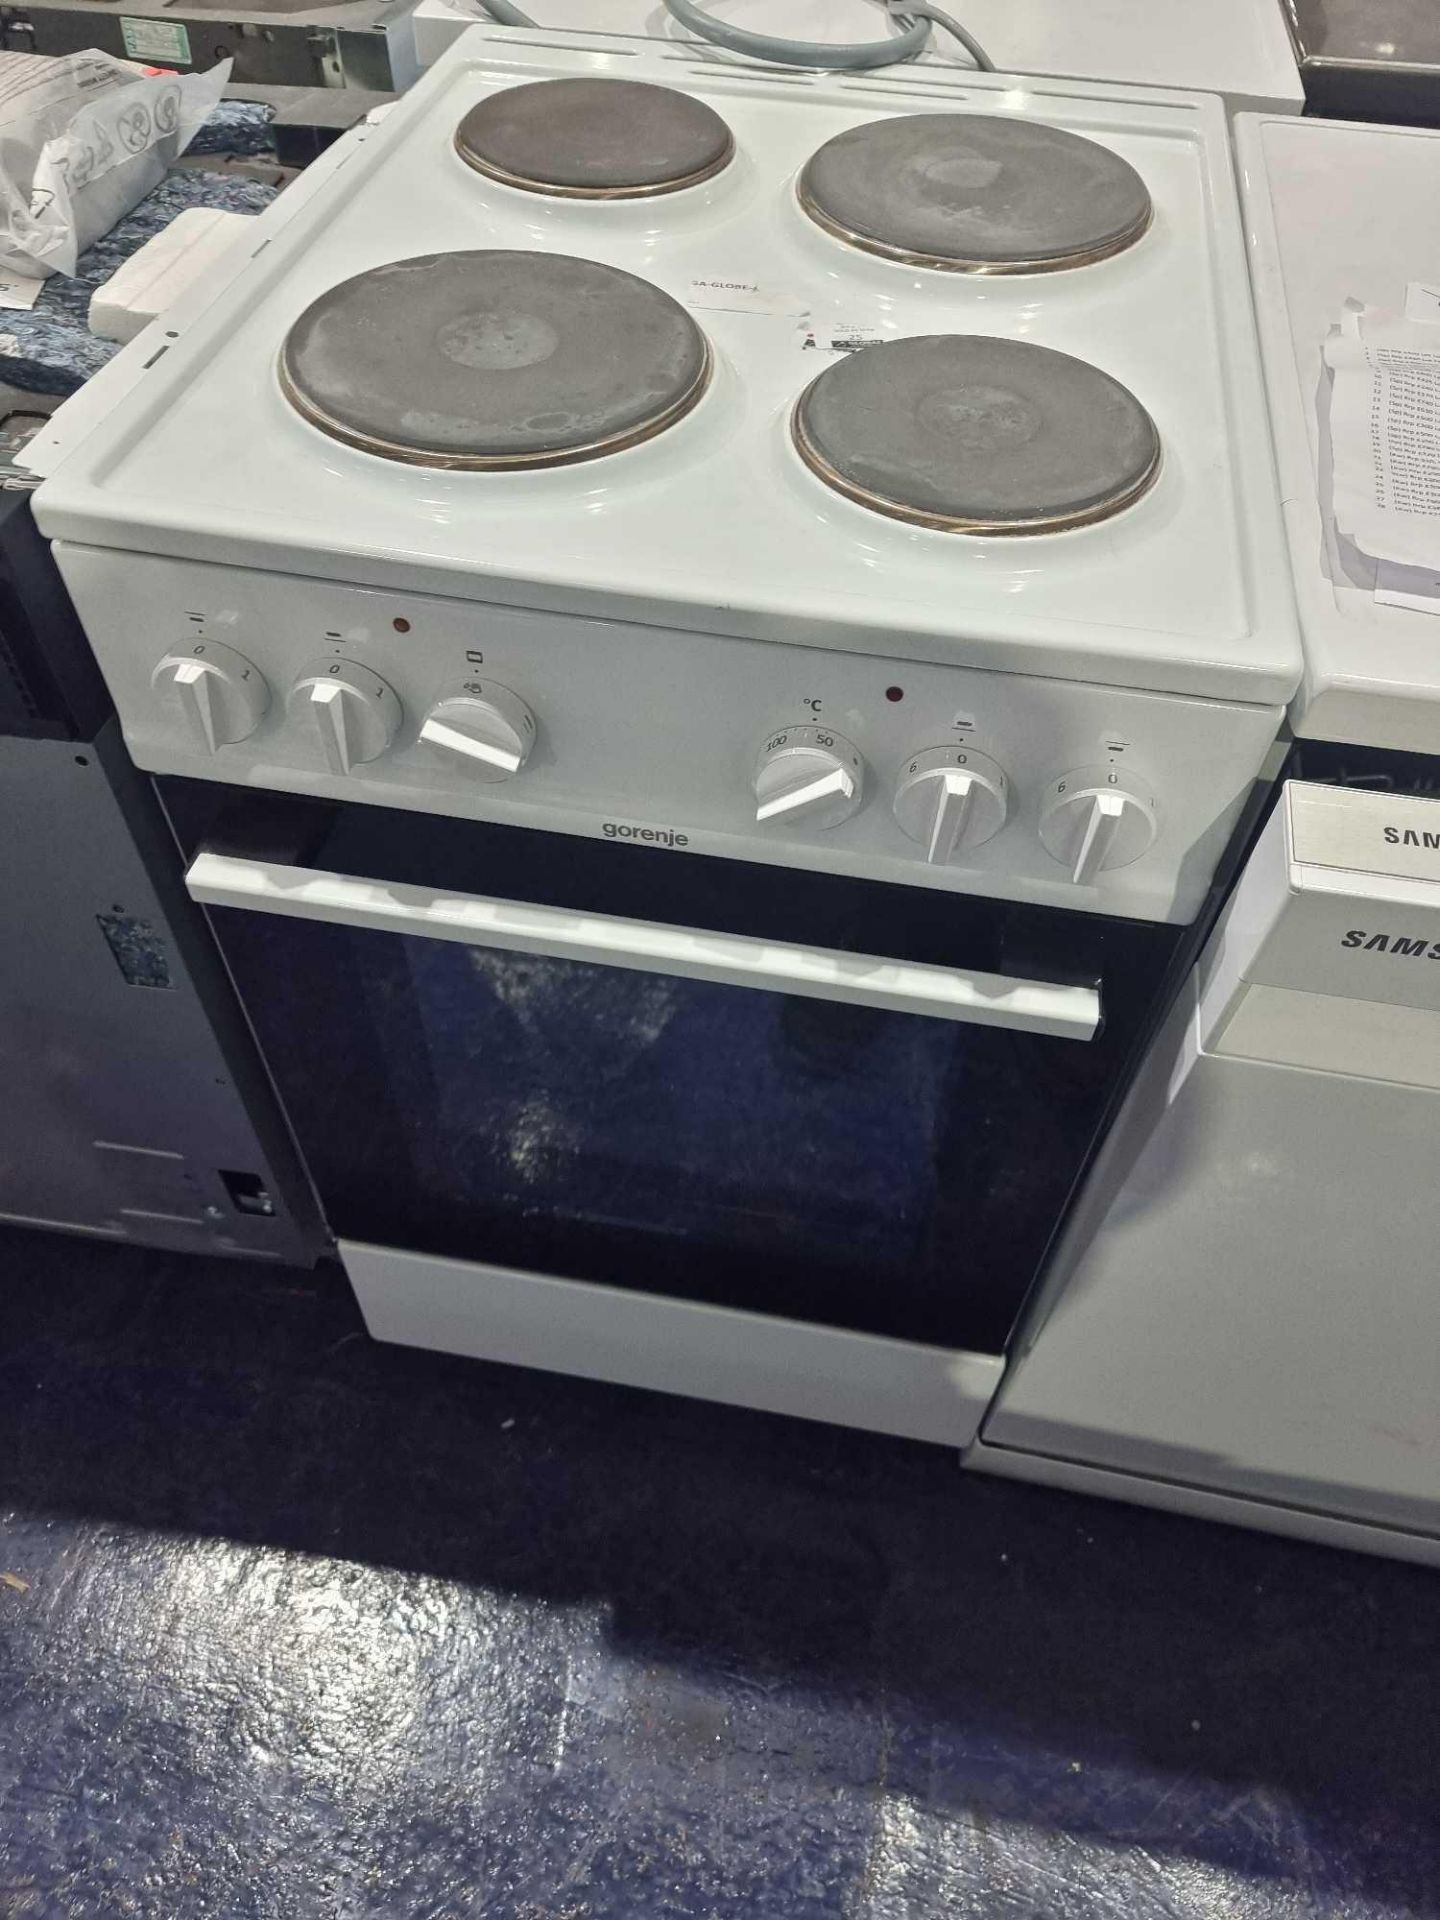 (Kw) RRP £300, Lot To Contain X1 Gorenje E5111Wg Electric Cooker, Unboxed - Image 3 of 4